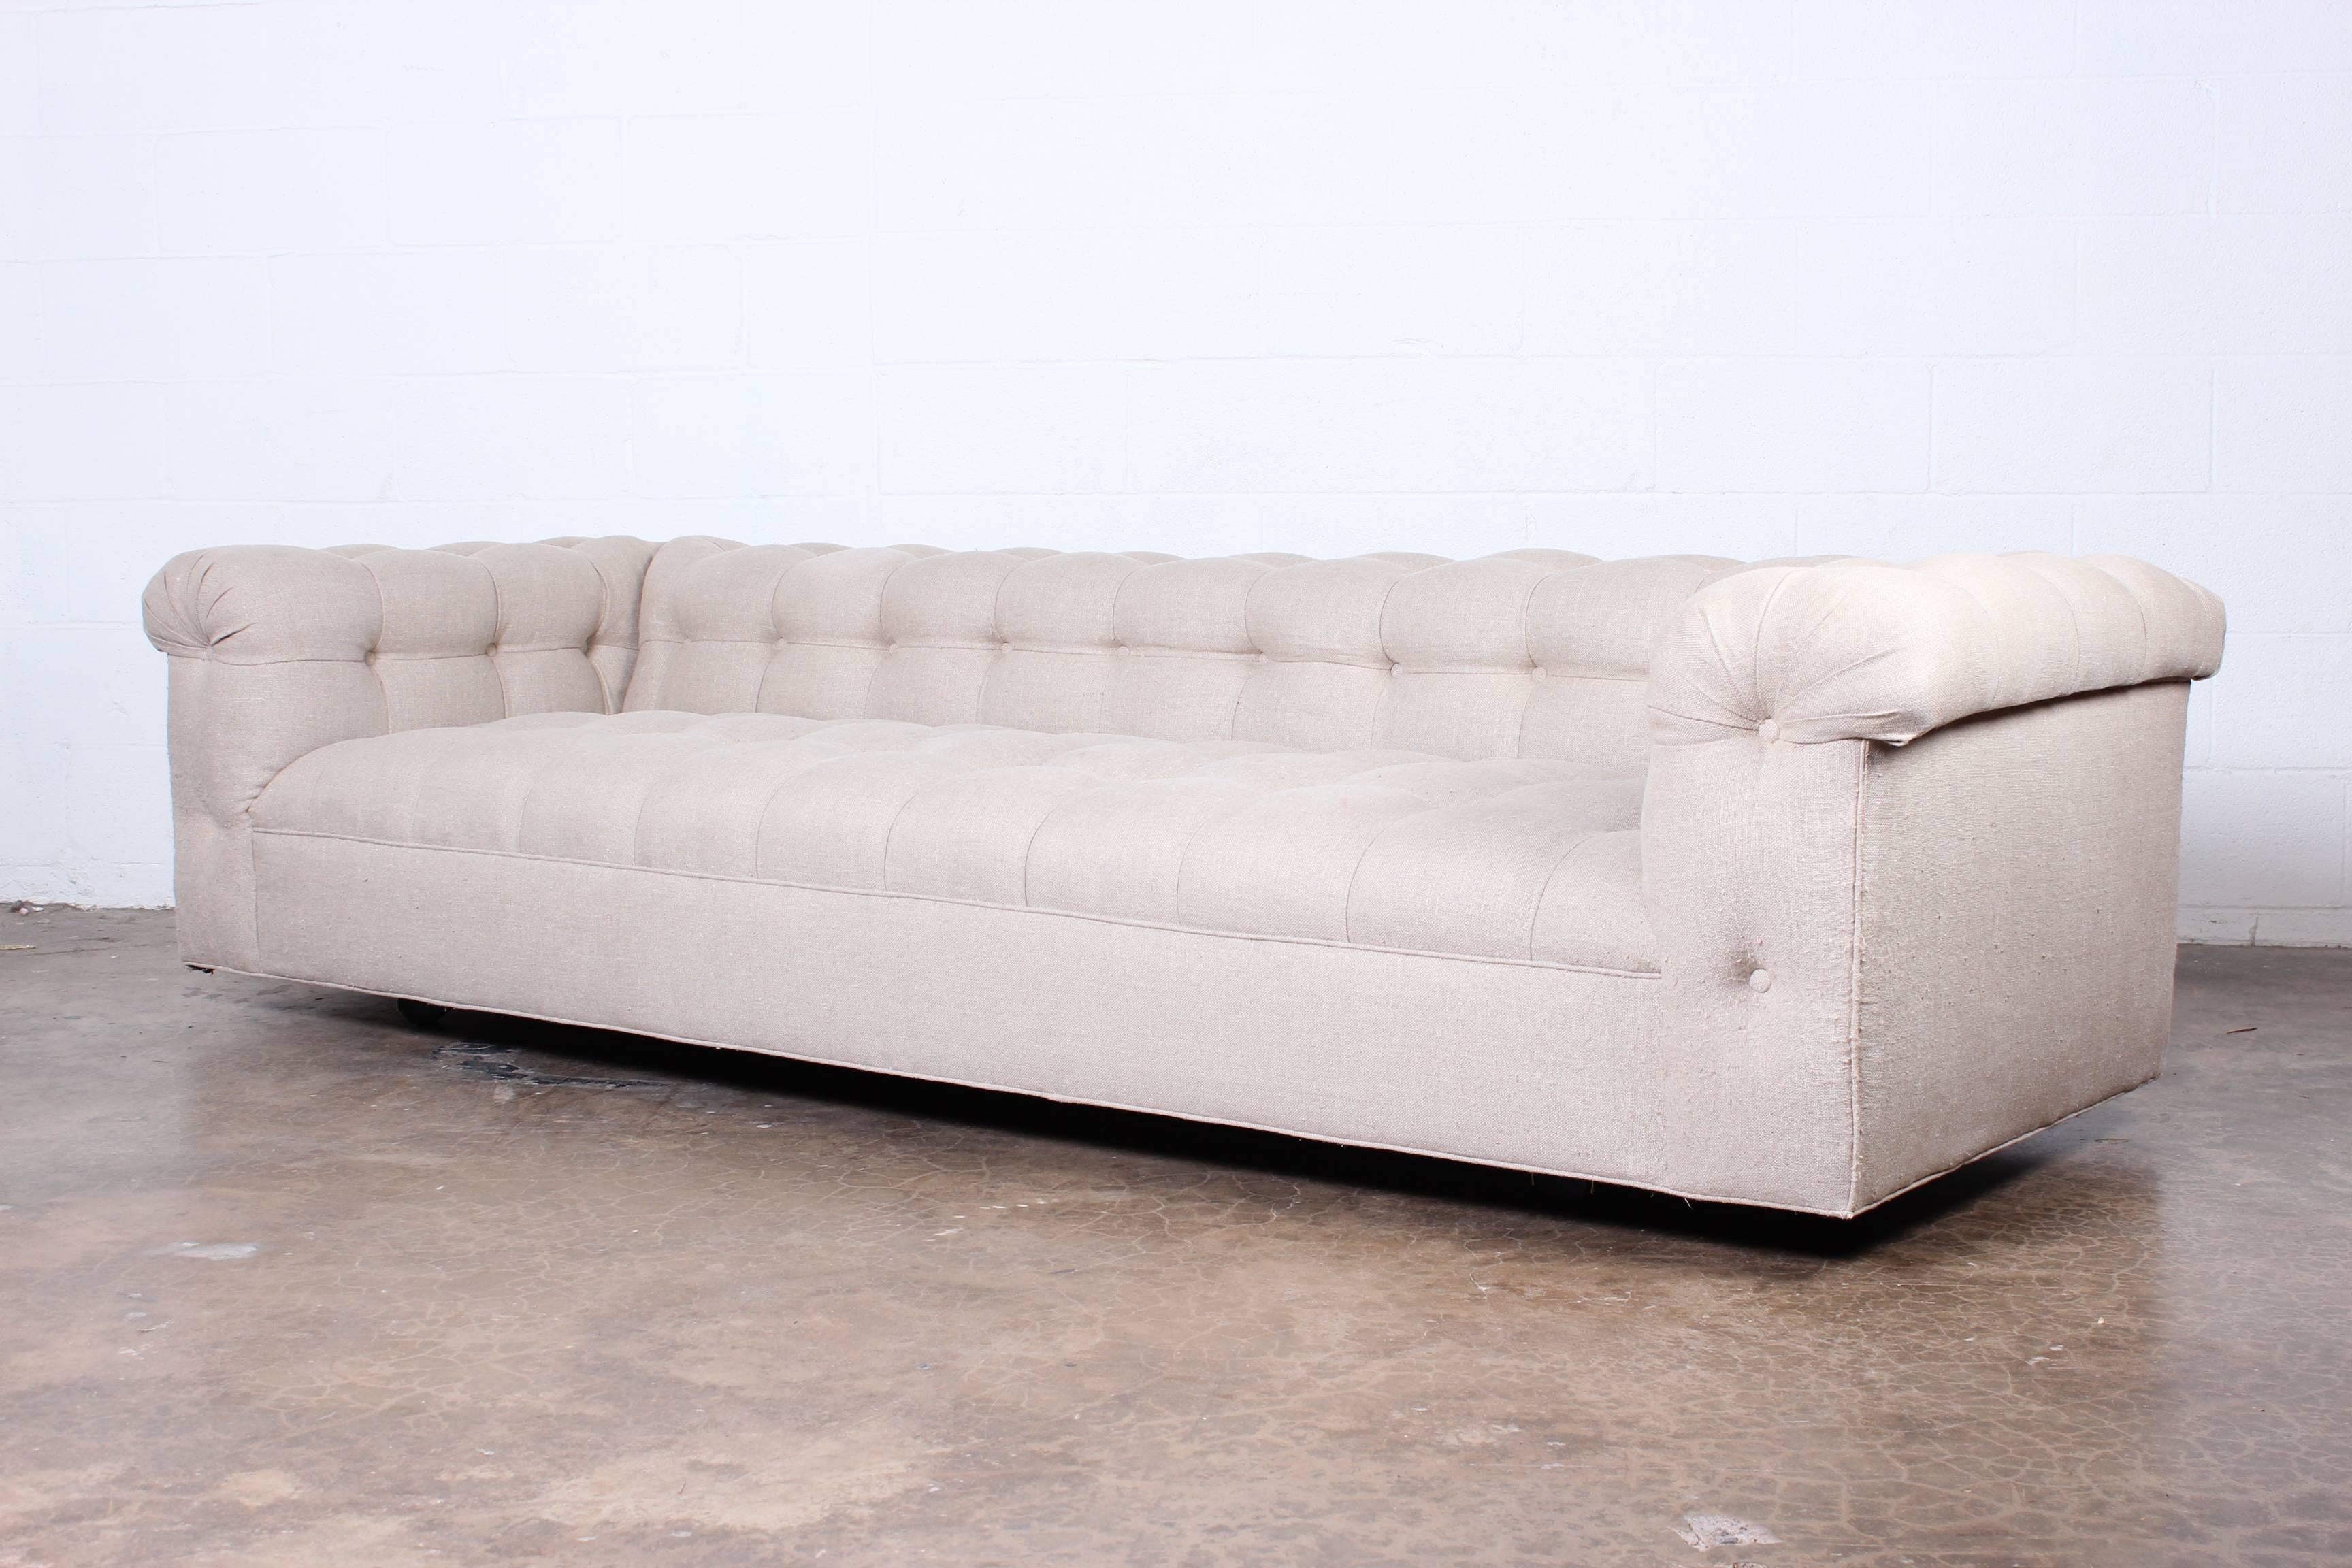 Mid-20th Century Party Sofa Designed by Edward Wormley for Dunbar  ( pair available )